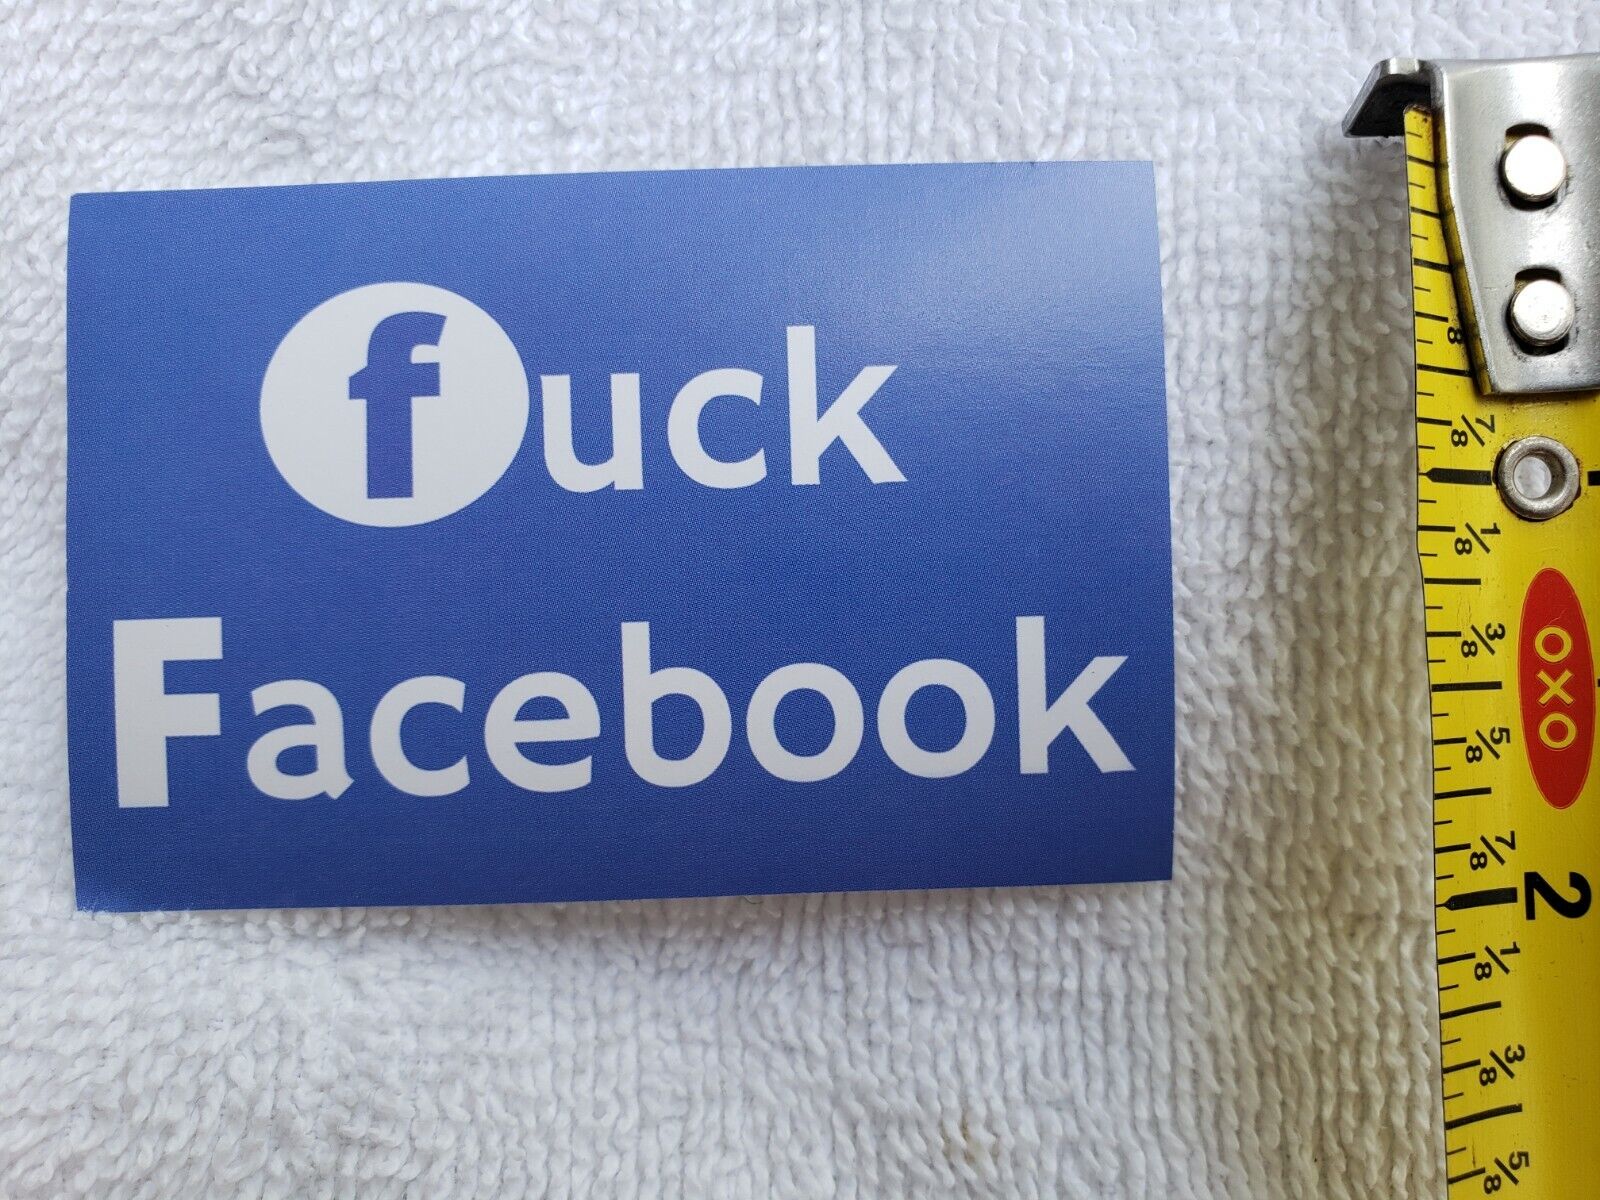 Facebook Hater Conservative Bumper Sticker Includes shipping $1. shipping  1 